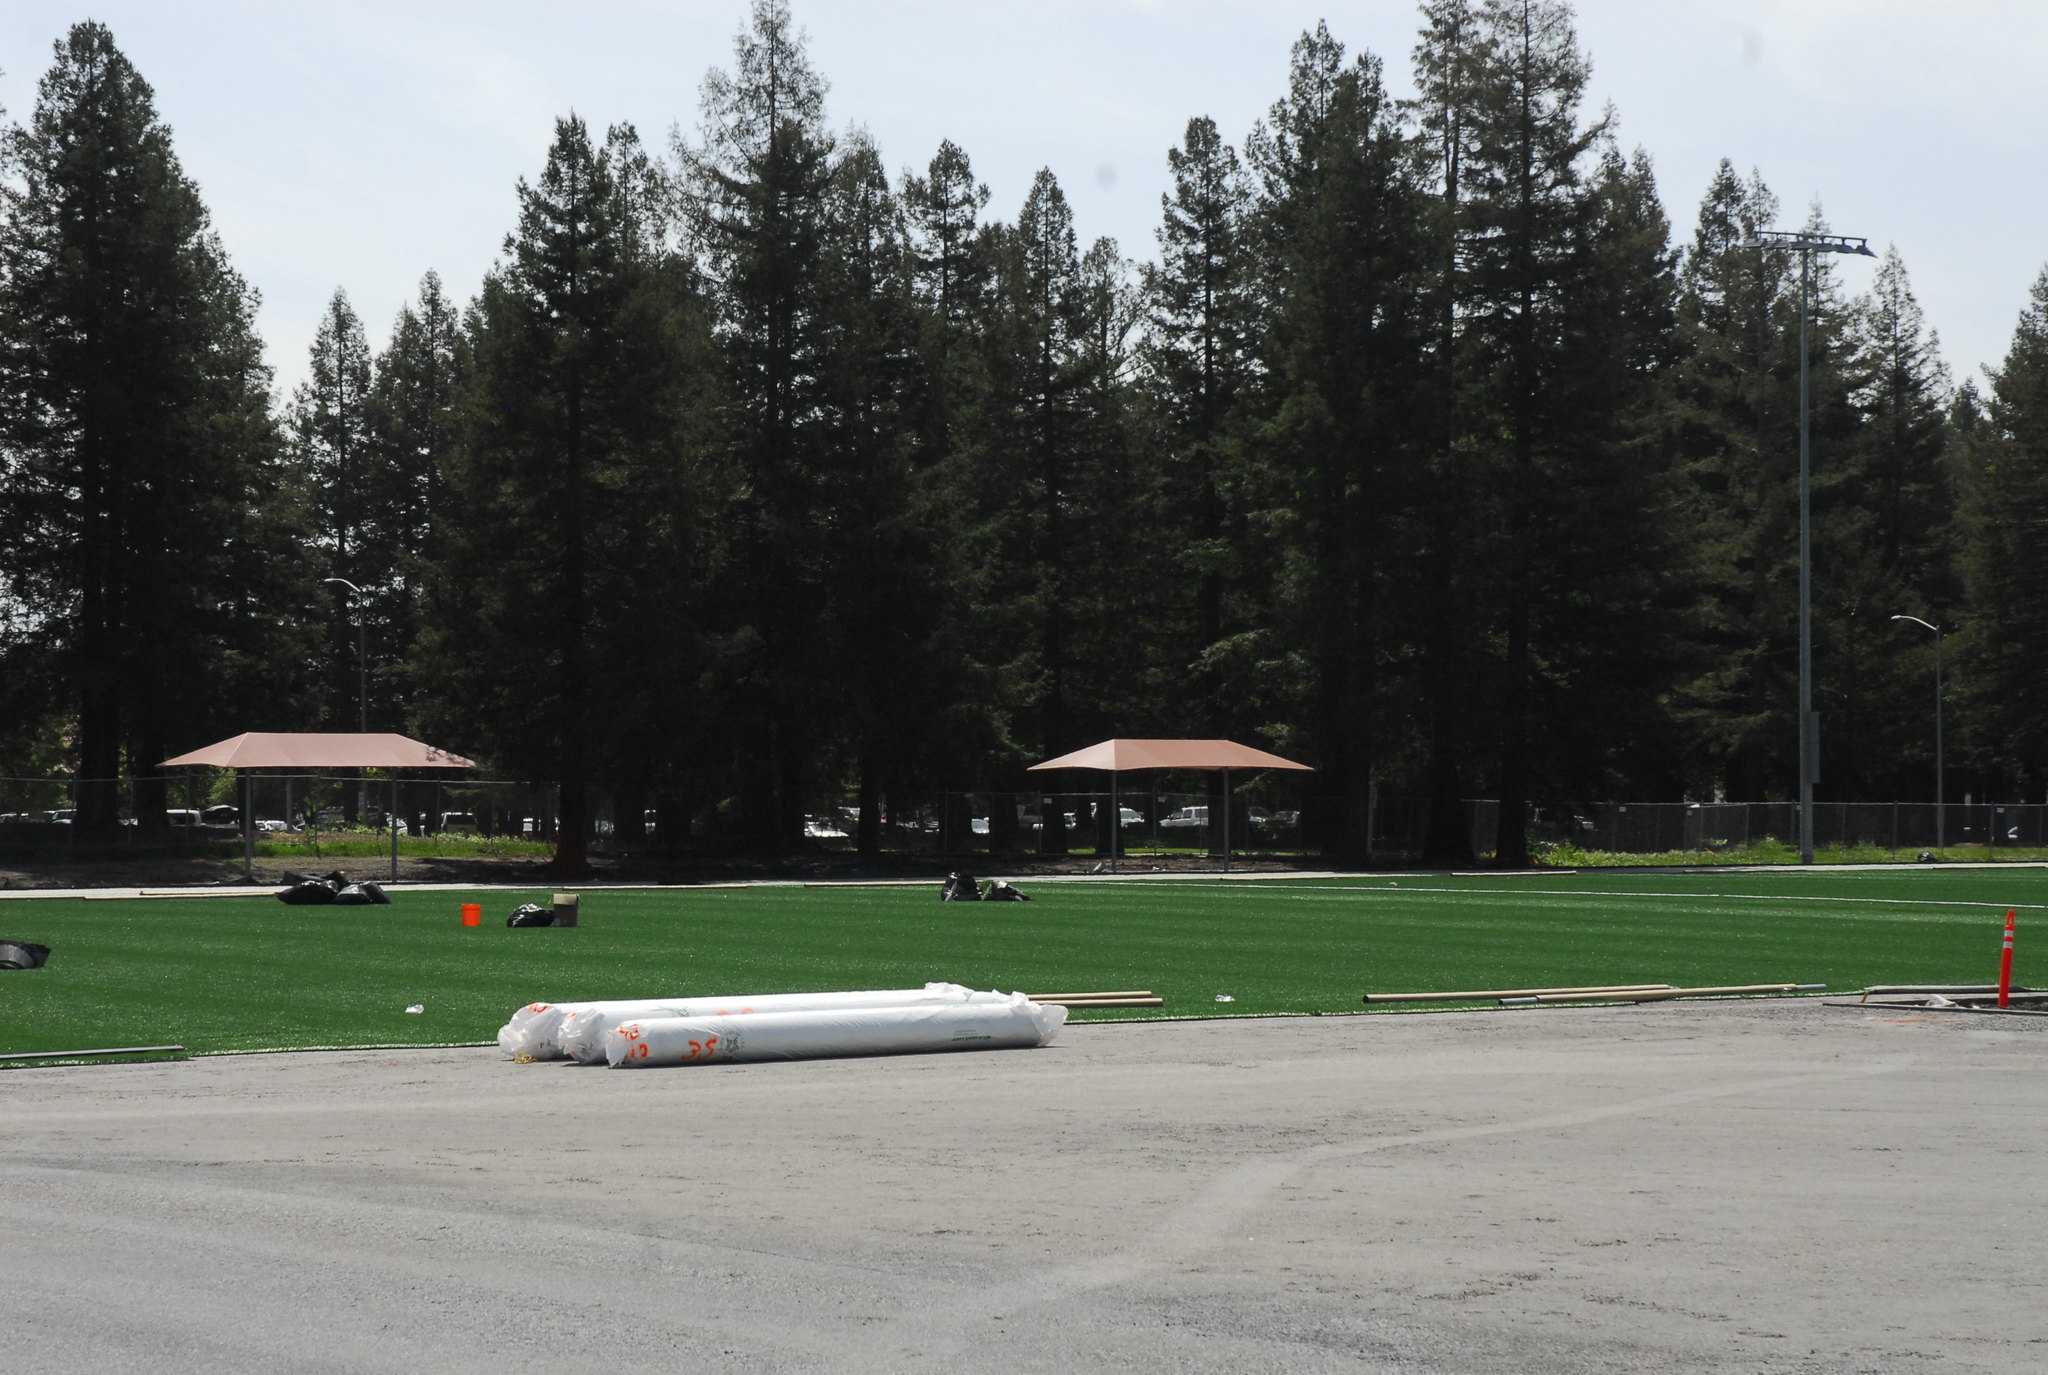 Sunrise Park, the $2.5 million project funded by SOMO, will feature an all-weather turf and be available to Sonoma State clubs.